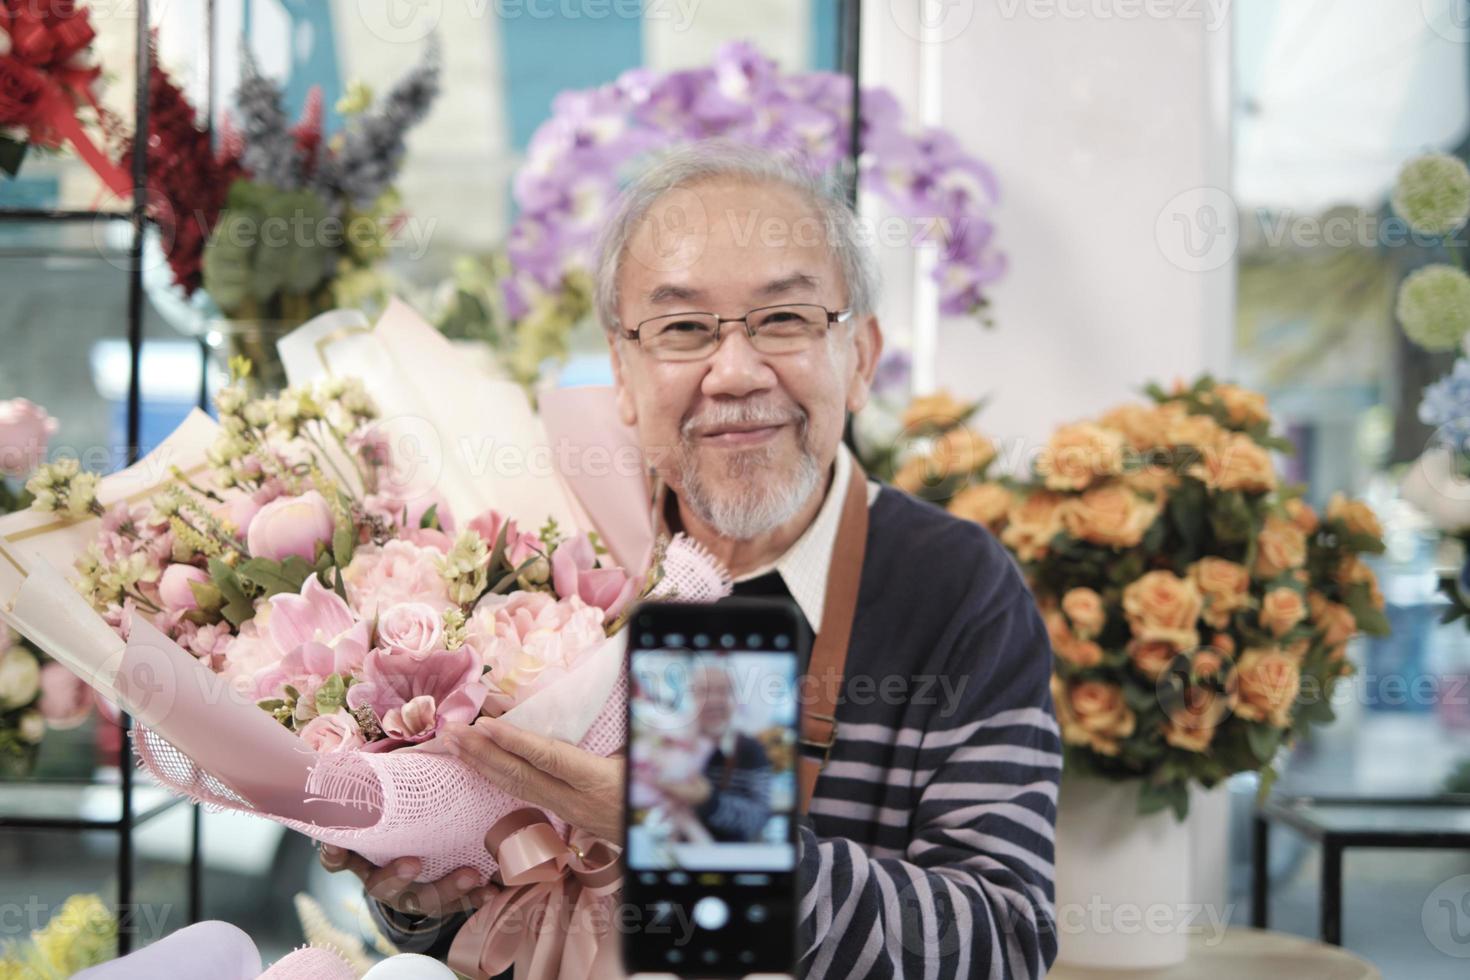 E-commerce business, one senior male florist workers demonstrate and show floral arrangements via online live streaming with smartphone application in a bright flower shop, a beautiful blossoms store. photo